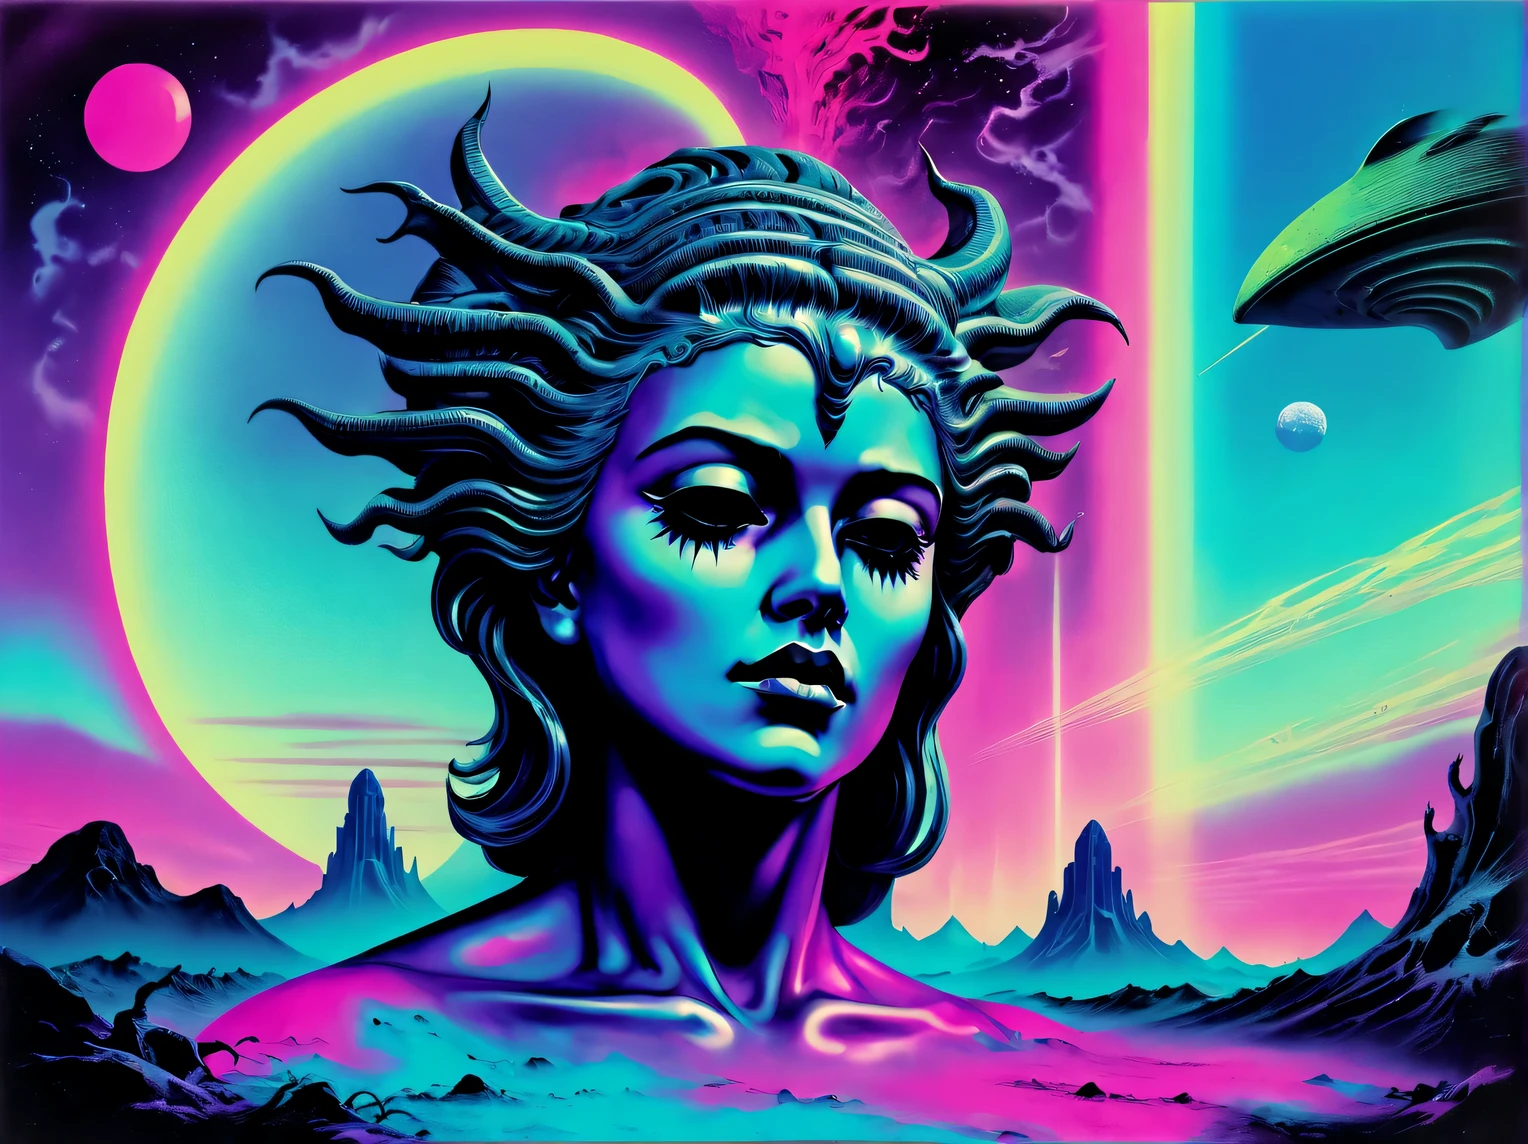 vapor wave aesthetics, A look from the outside, beyond the event horizon, shining of the pure mind, contact of many realities, psychedelic, HR Giger, Xue Wang Gothic Surrealism, all colors, Vapor wave effect